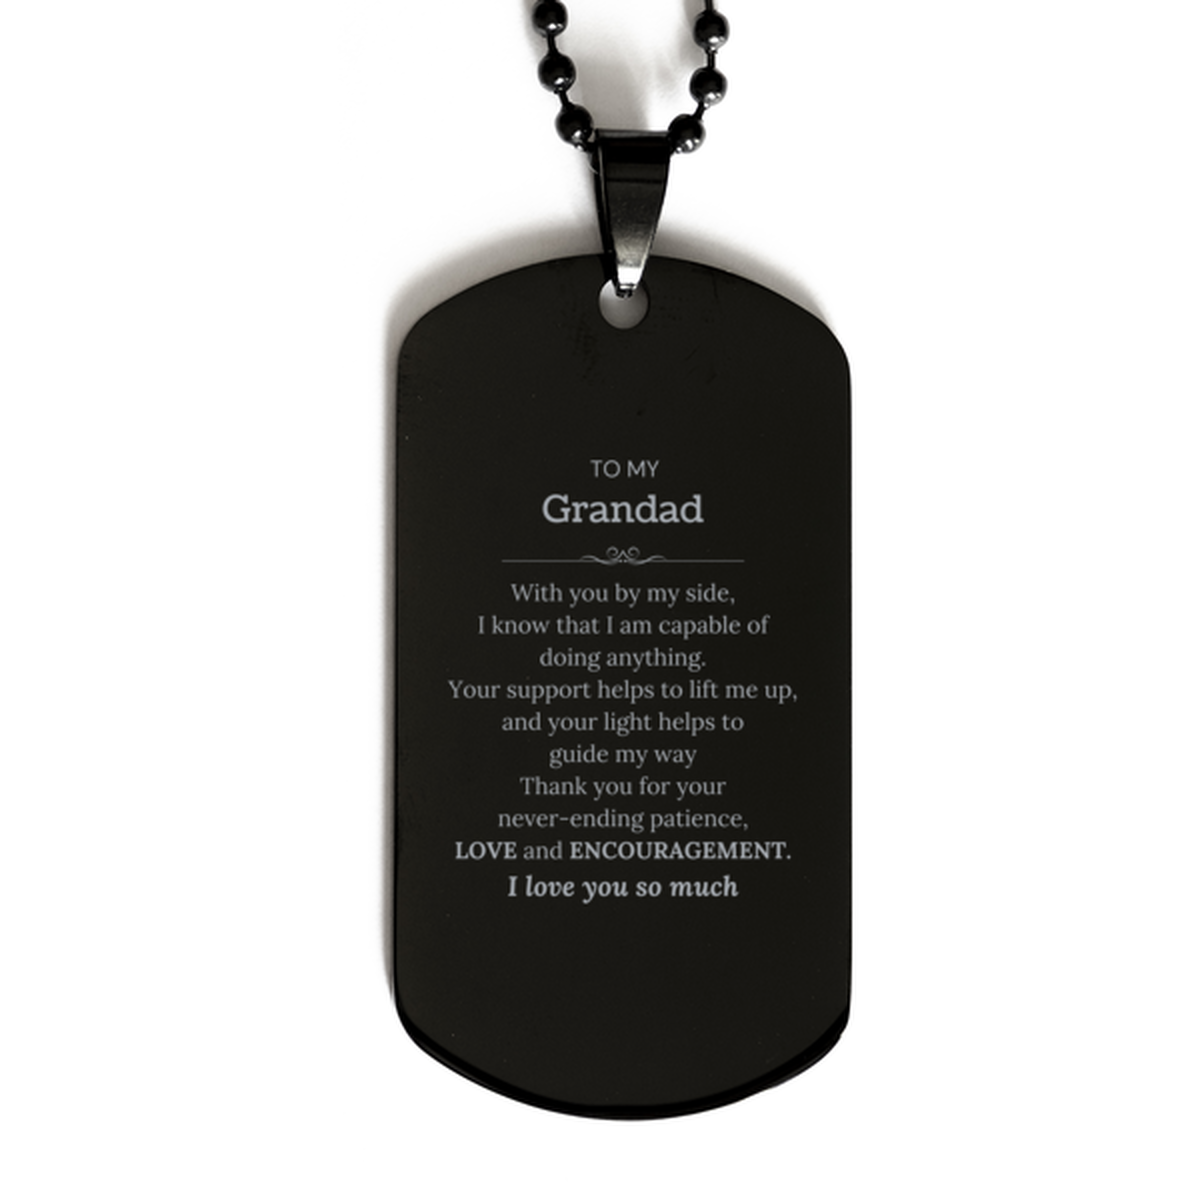 Appreciation Grandad Black Dog Tag Gifts, To My Grandad Birthday Christmas Wedding Keepsake Gifts for Grandad With you by my side, I know that I am capable of doing anything. I love you so much